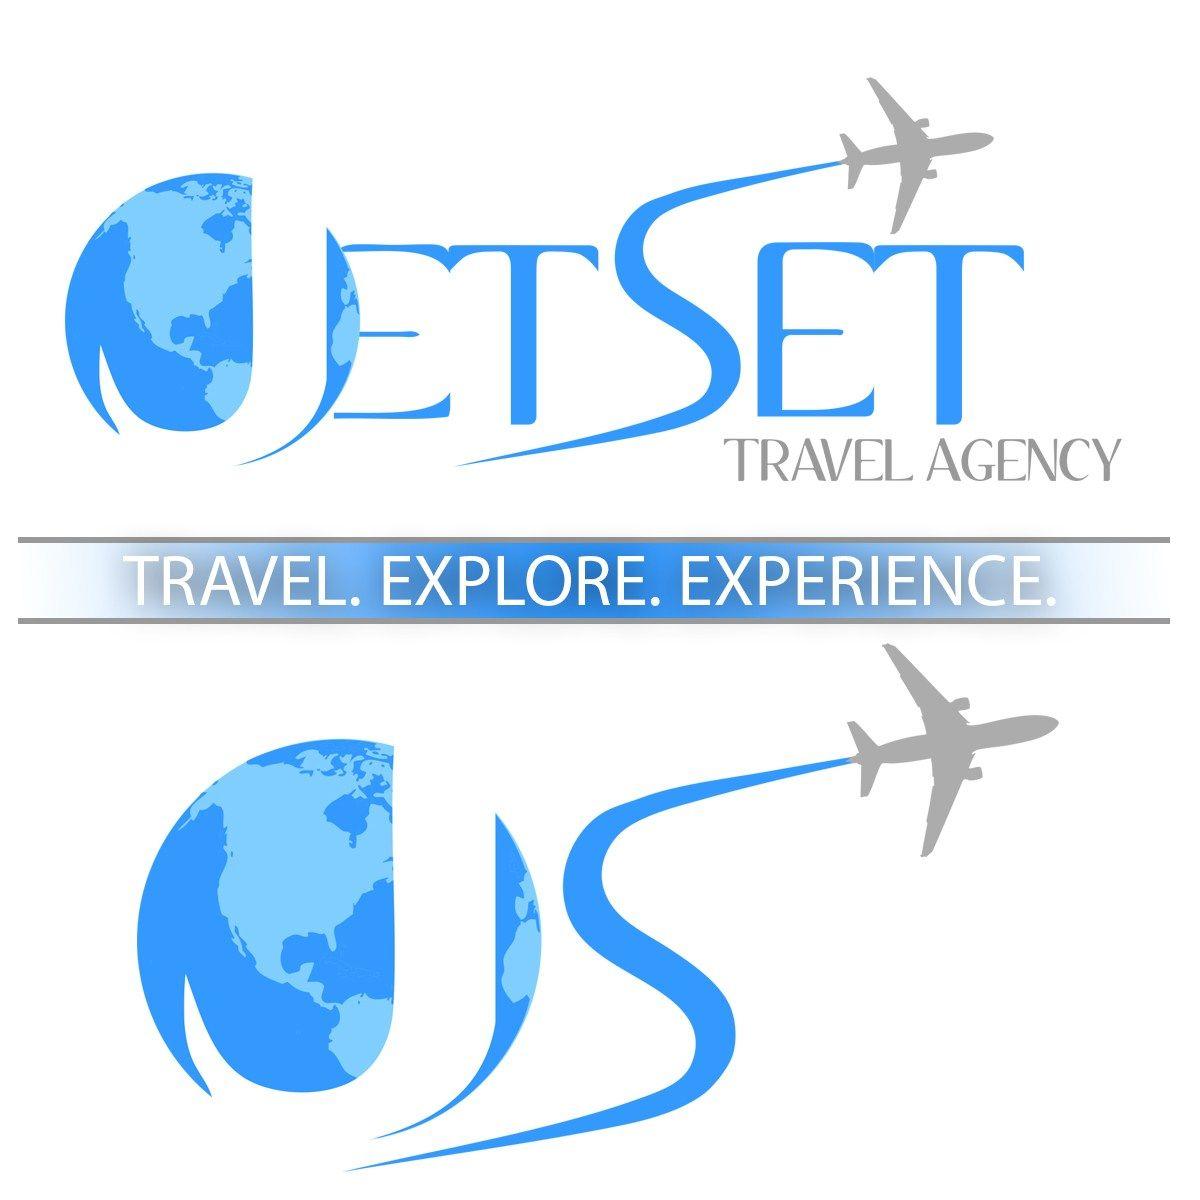 Display Logo - jetset-logo-display - Number 1 ProductionsNumber 1 Productions